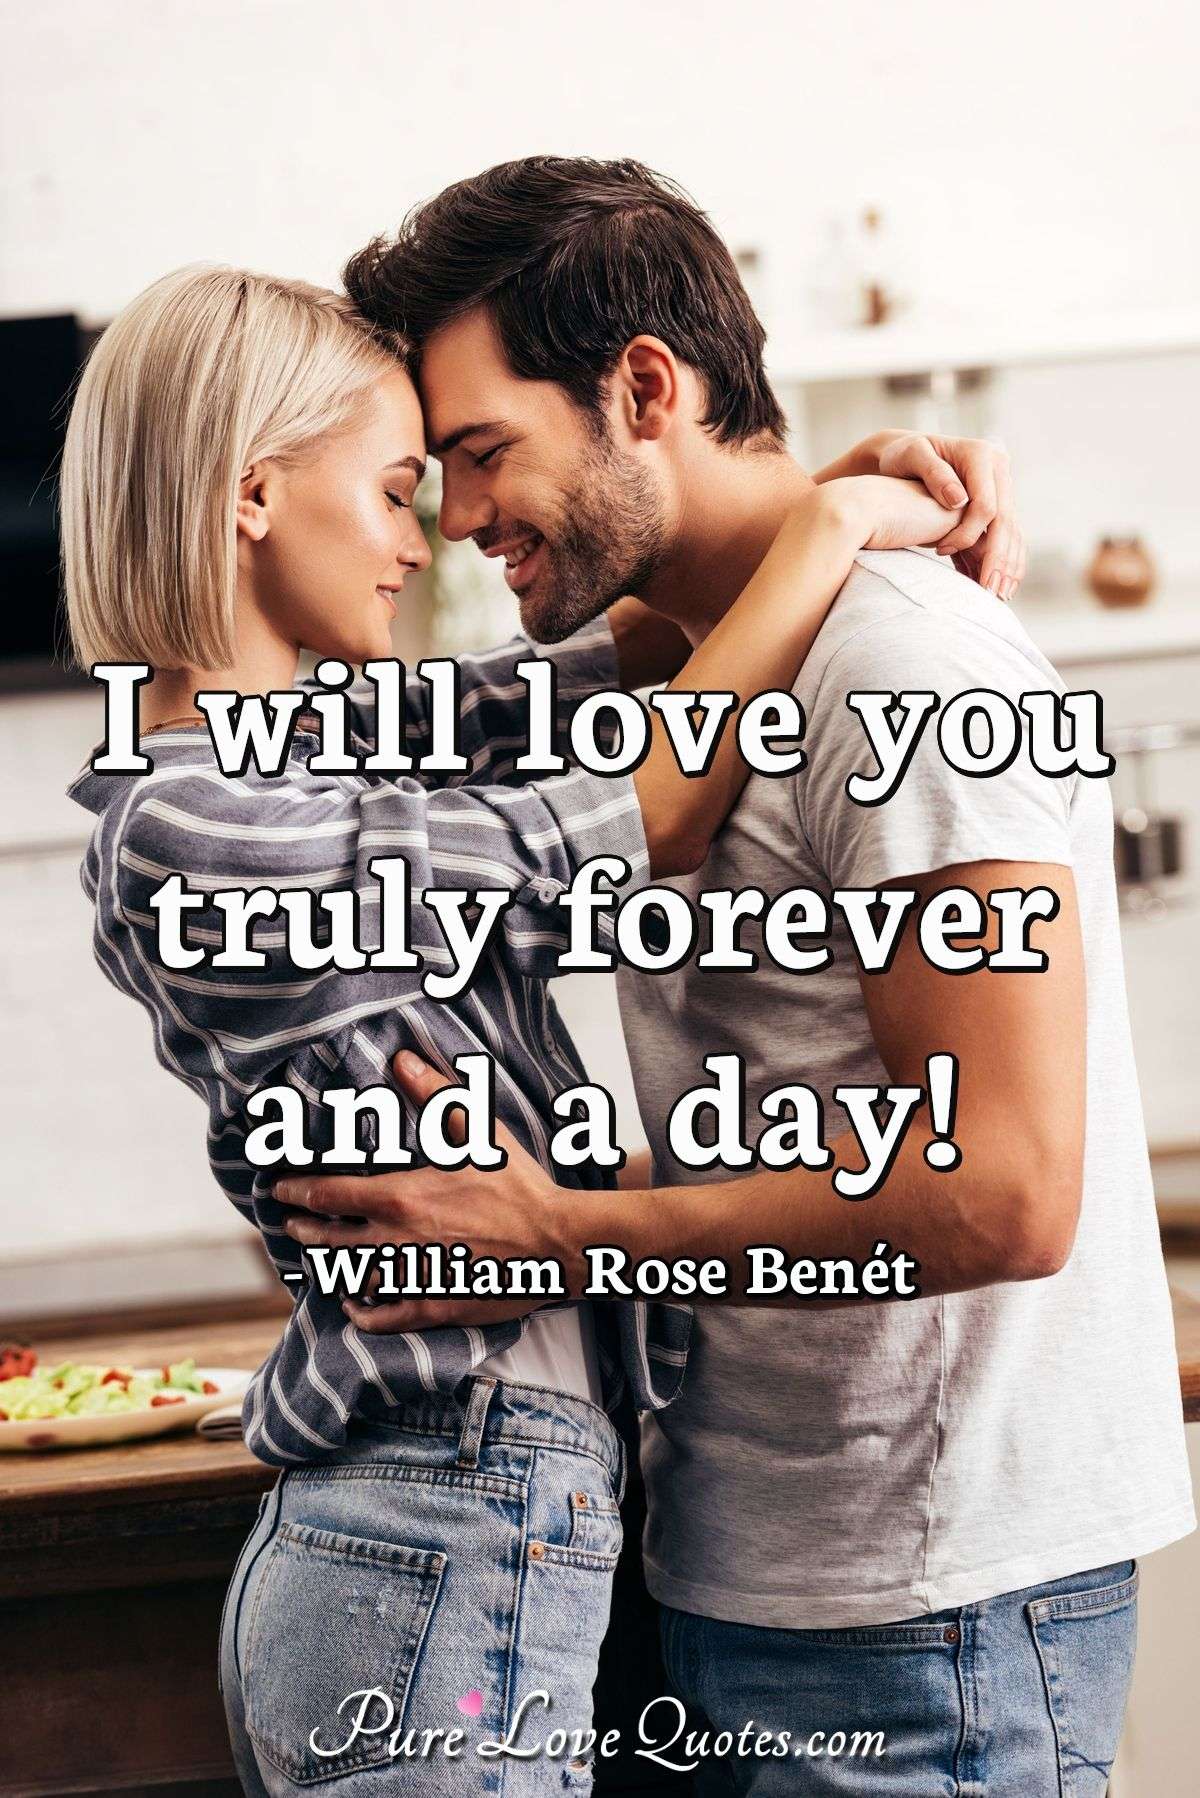 I will love you truly forever and a day! - William Rose Benét